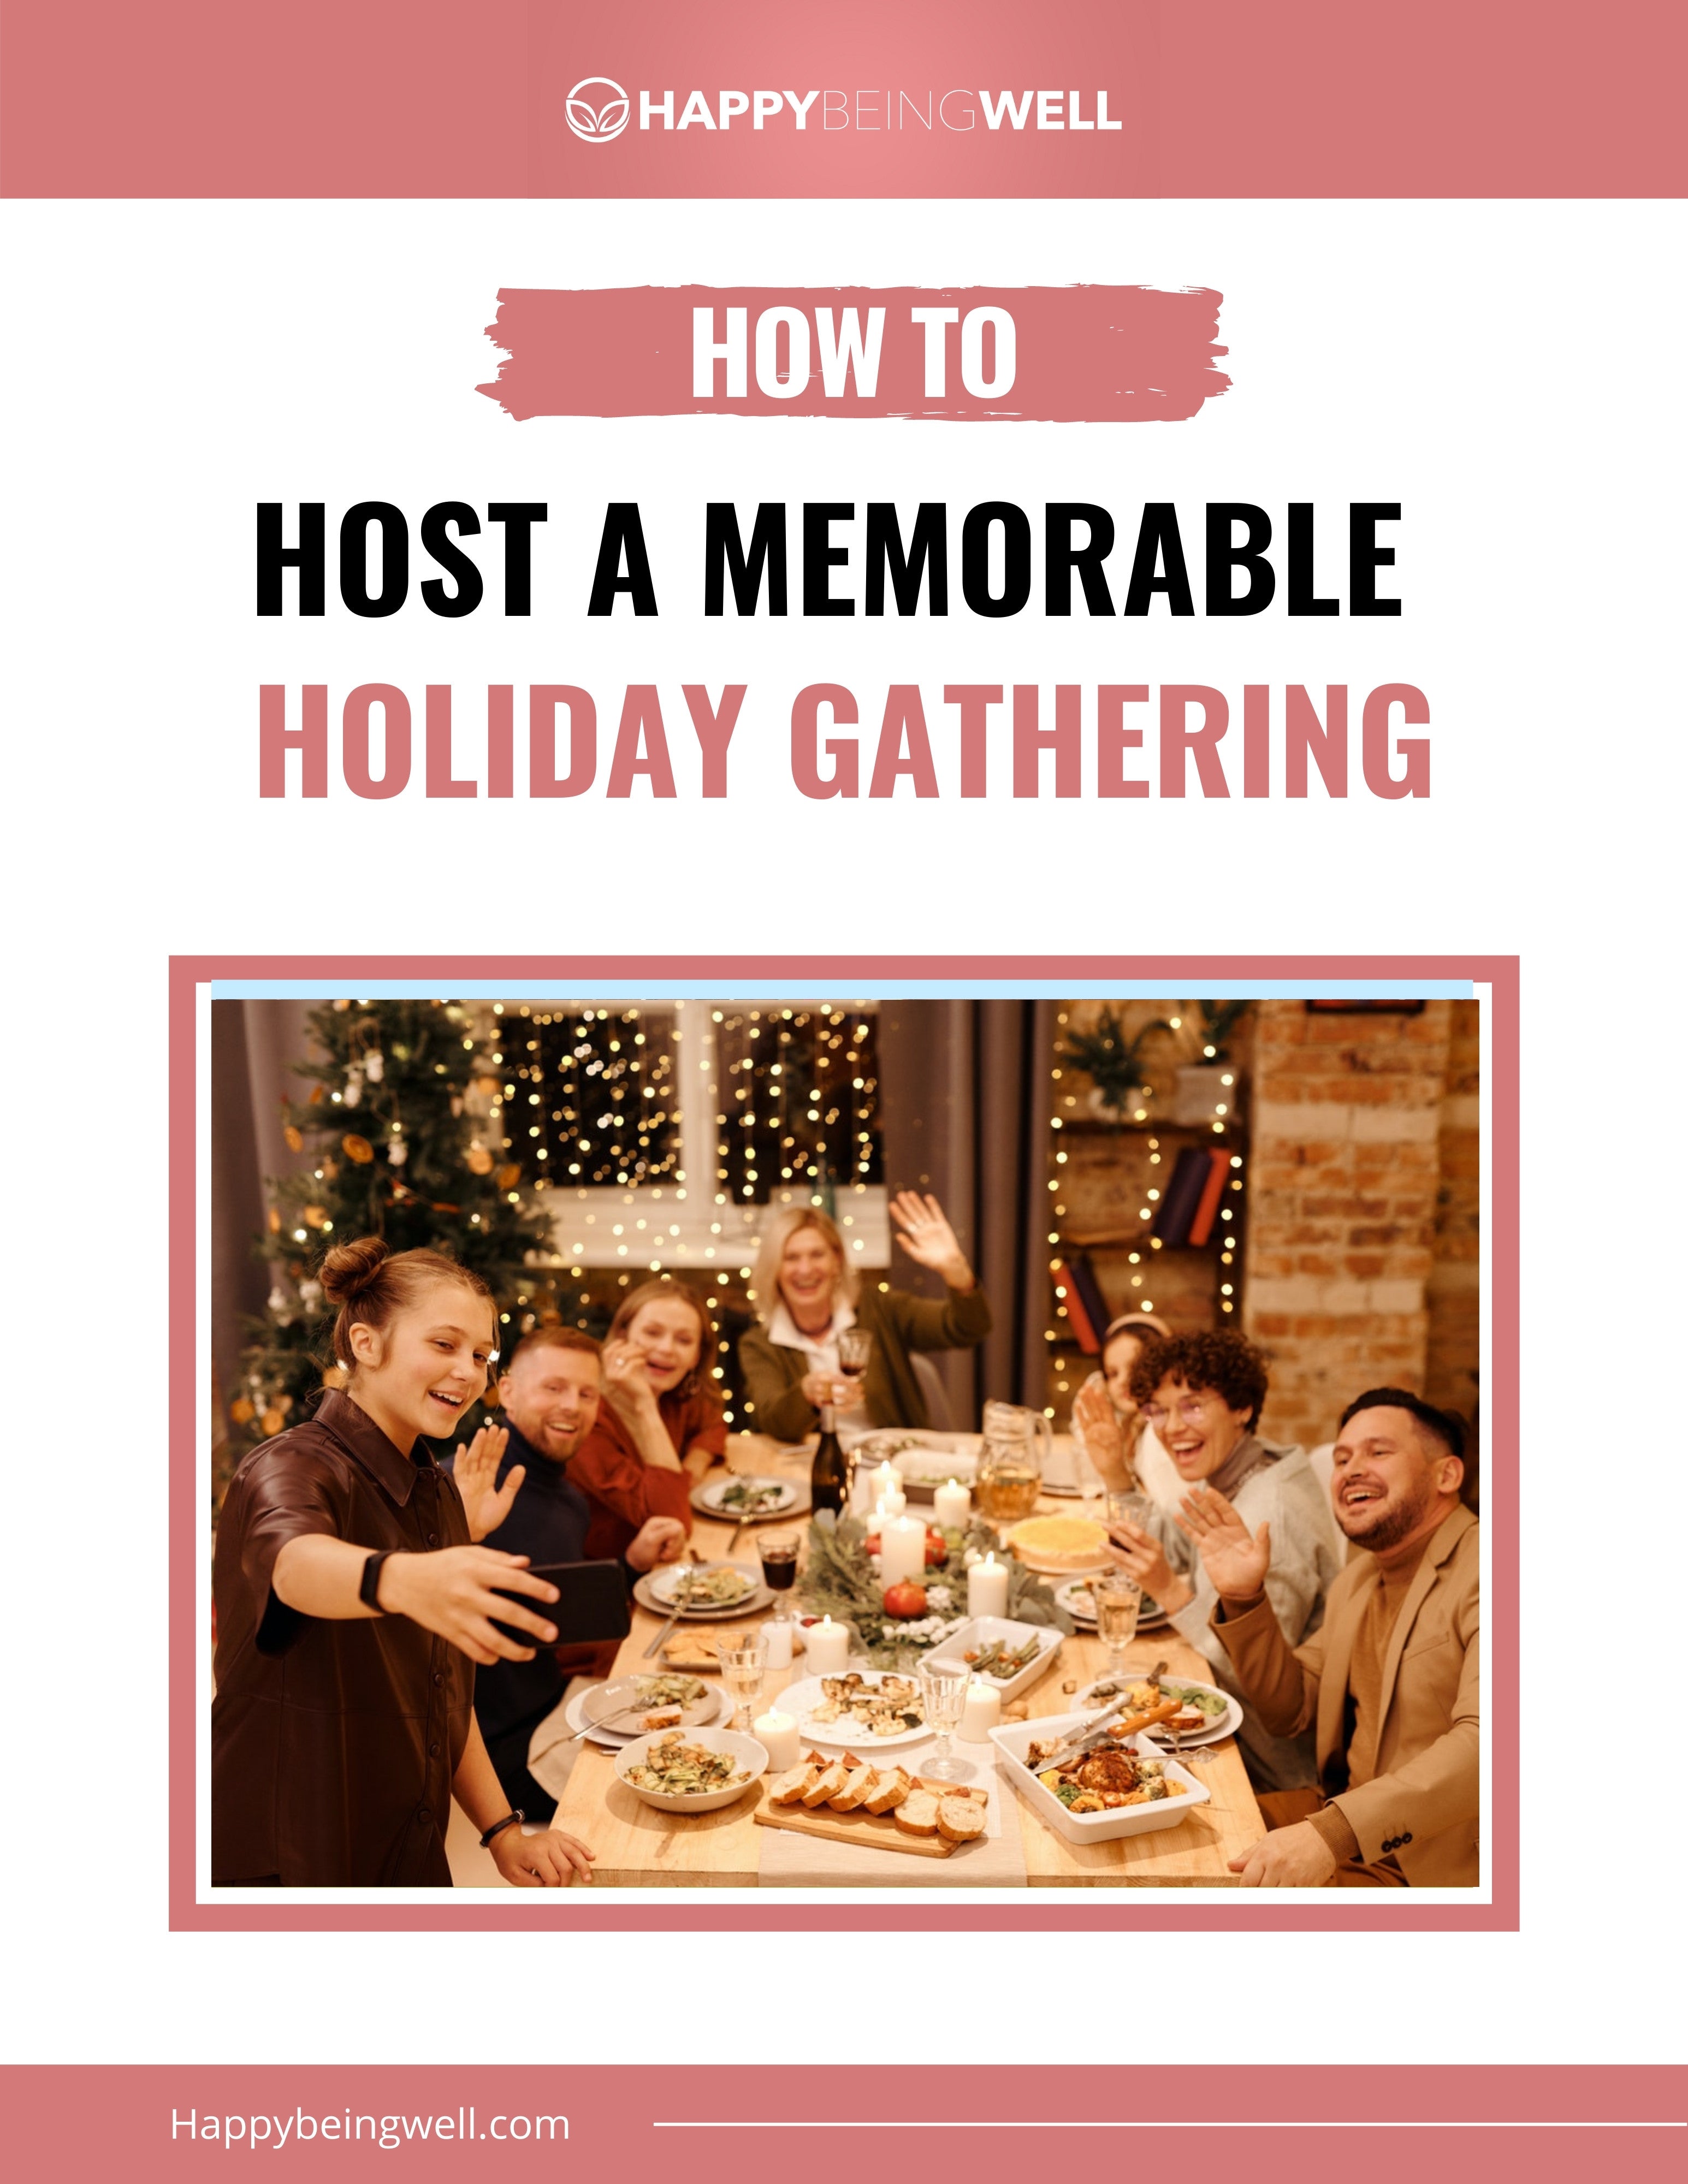 How to Host a Memorable Holiday Gathering